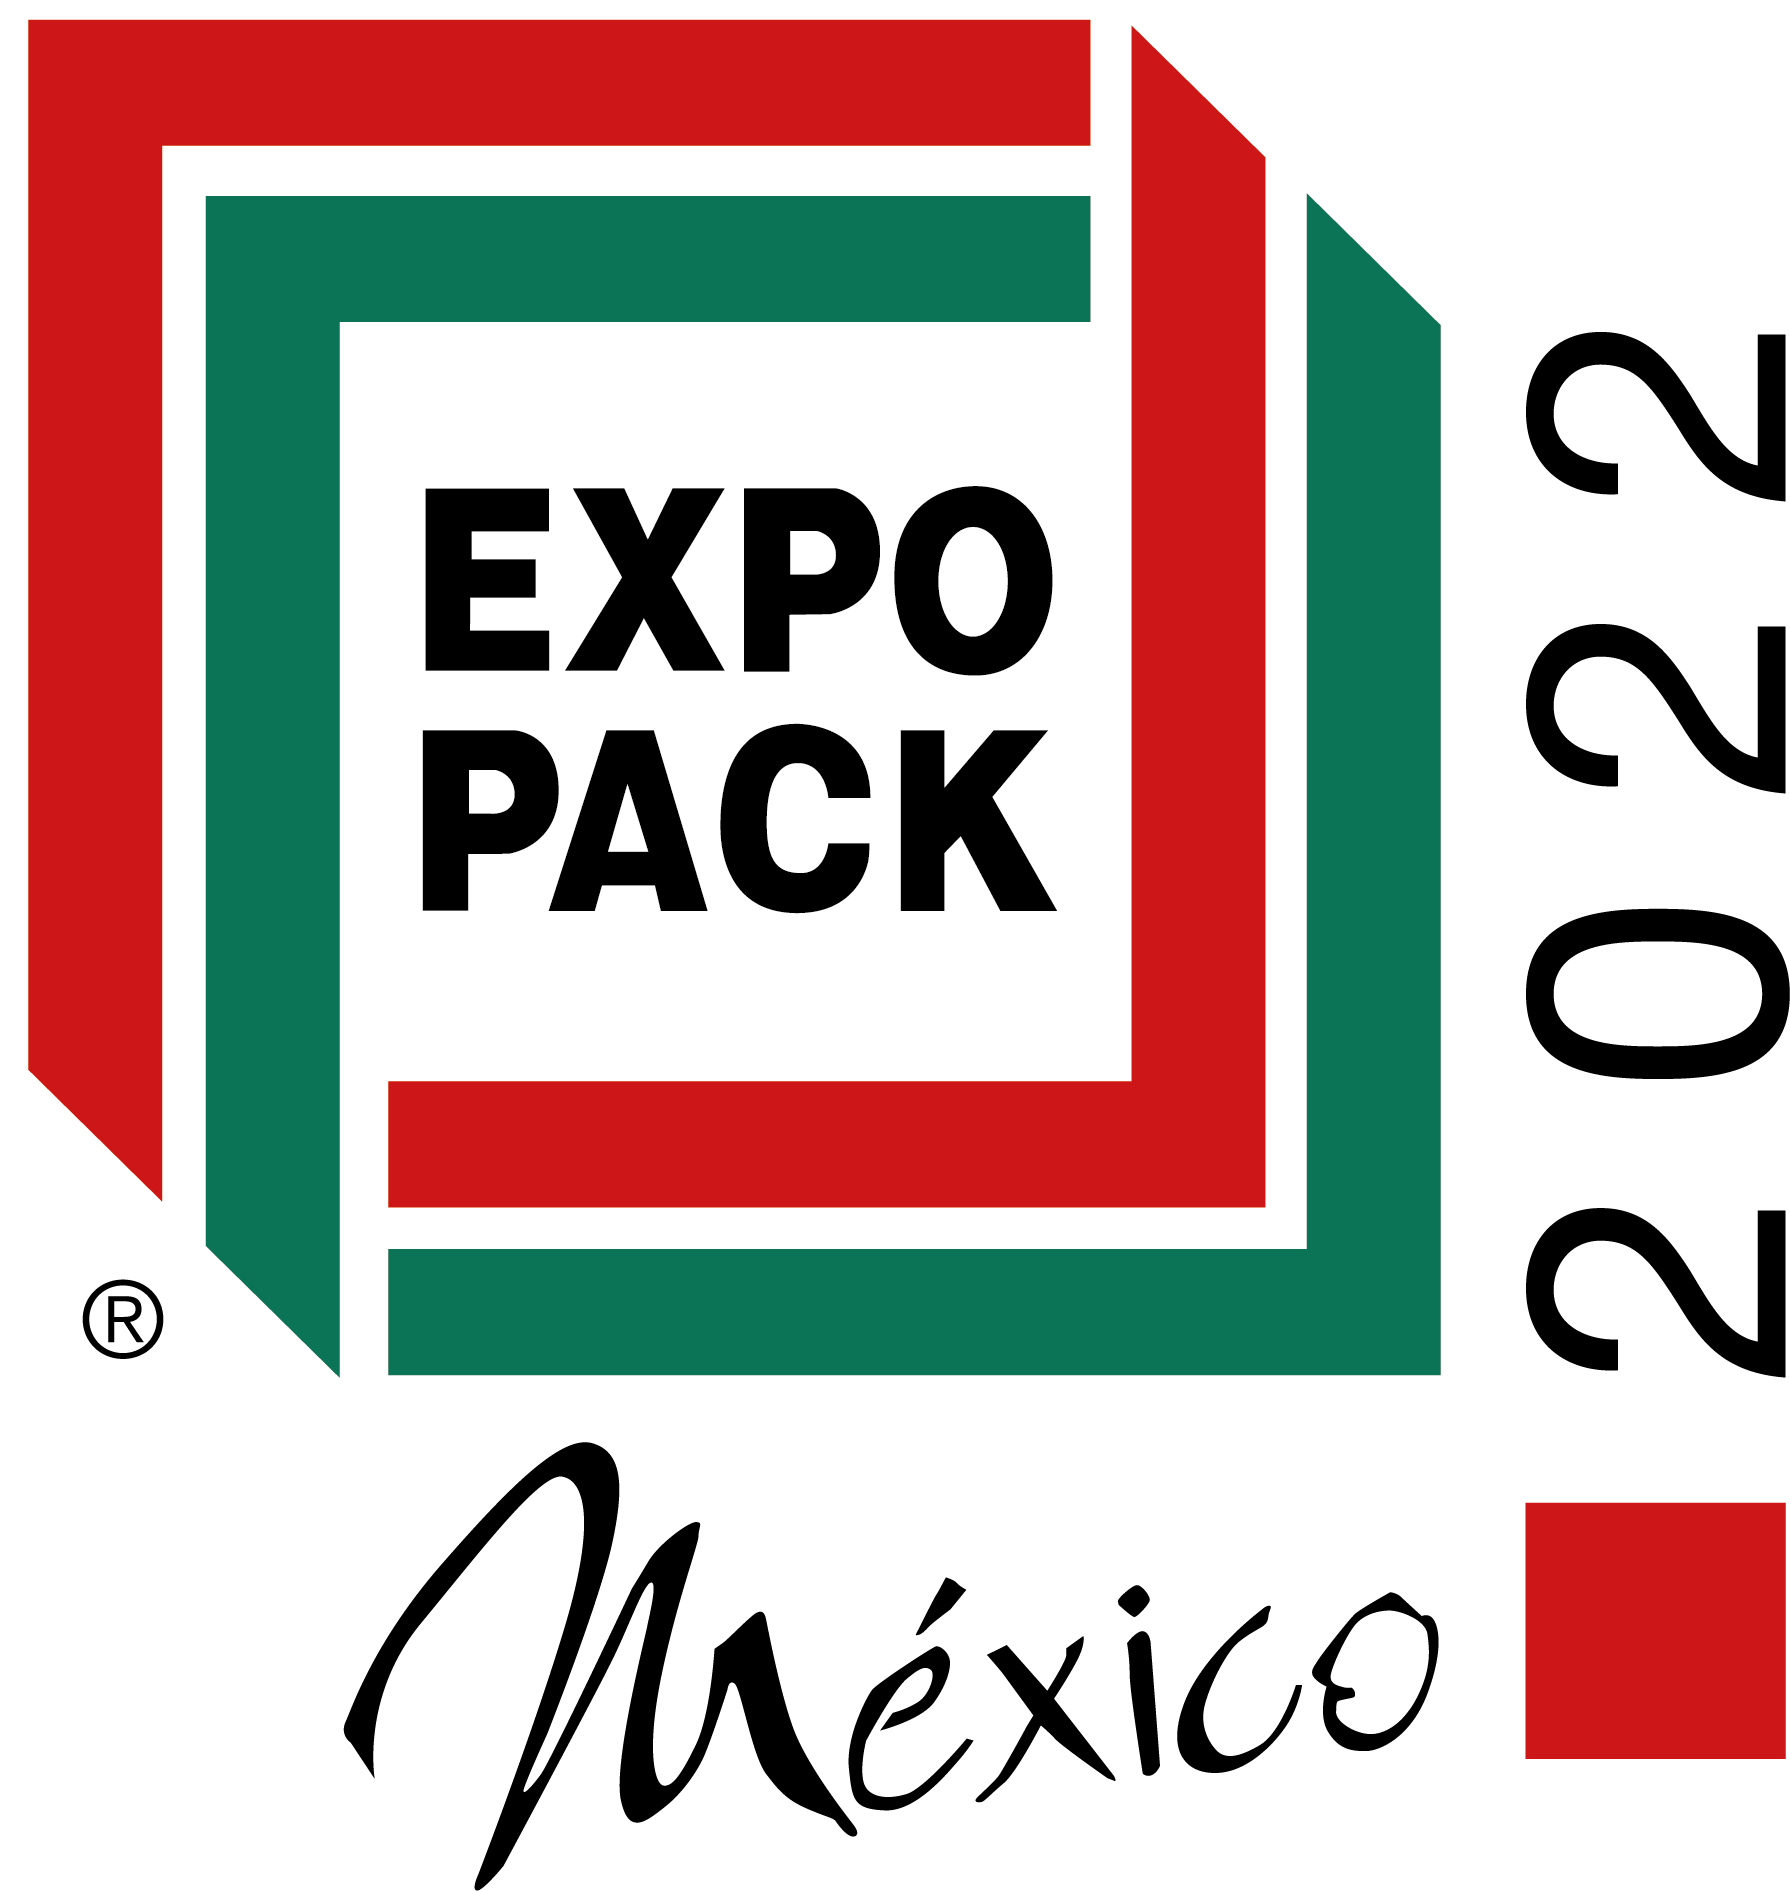 EXPO PACK